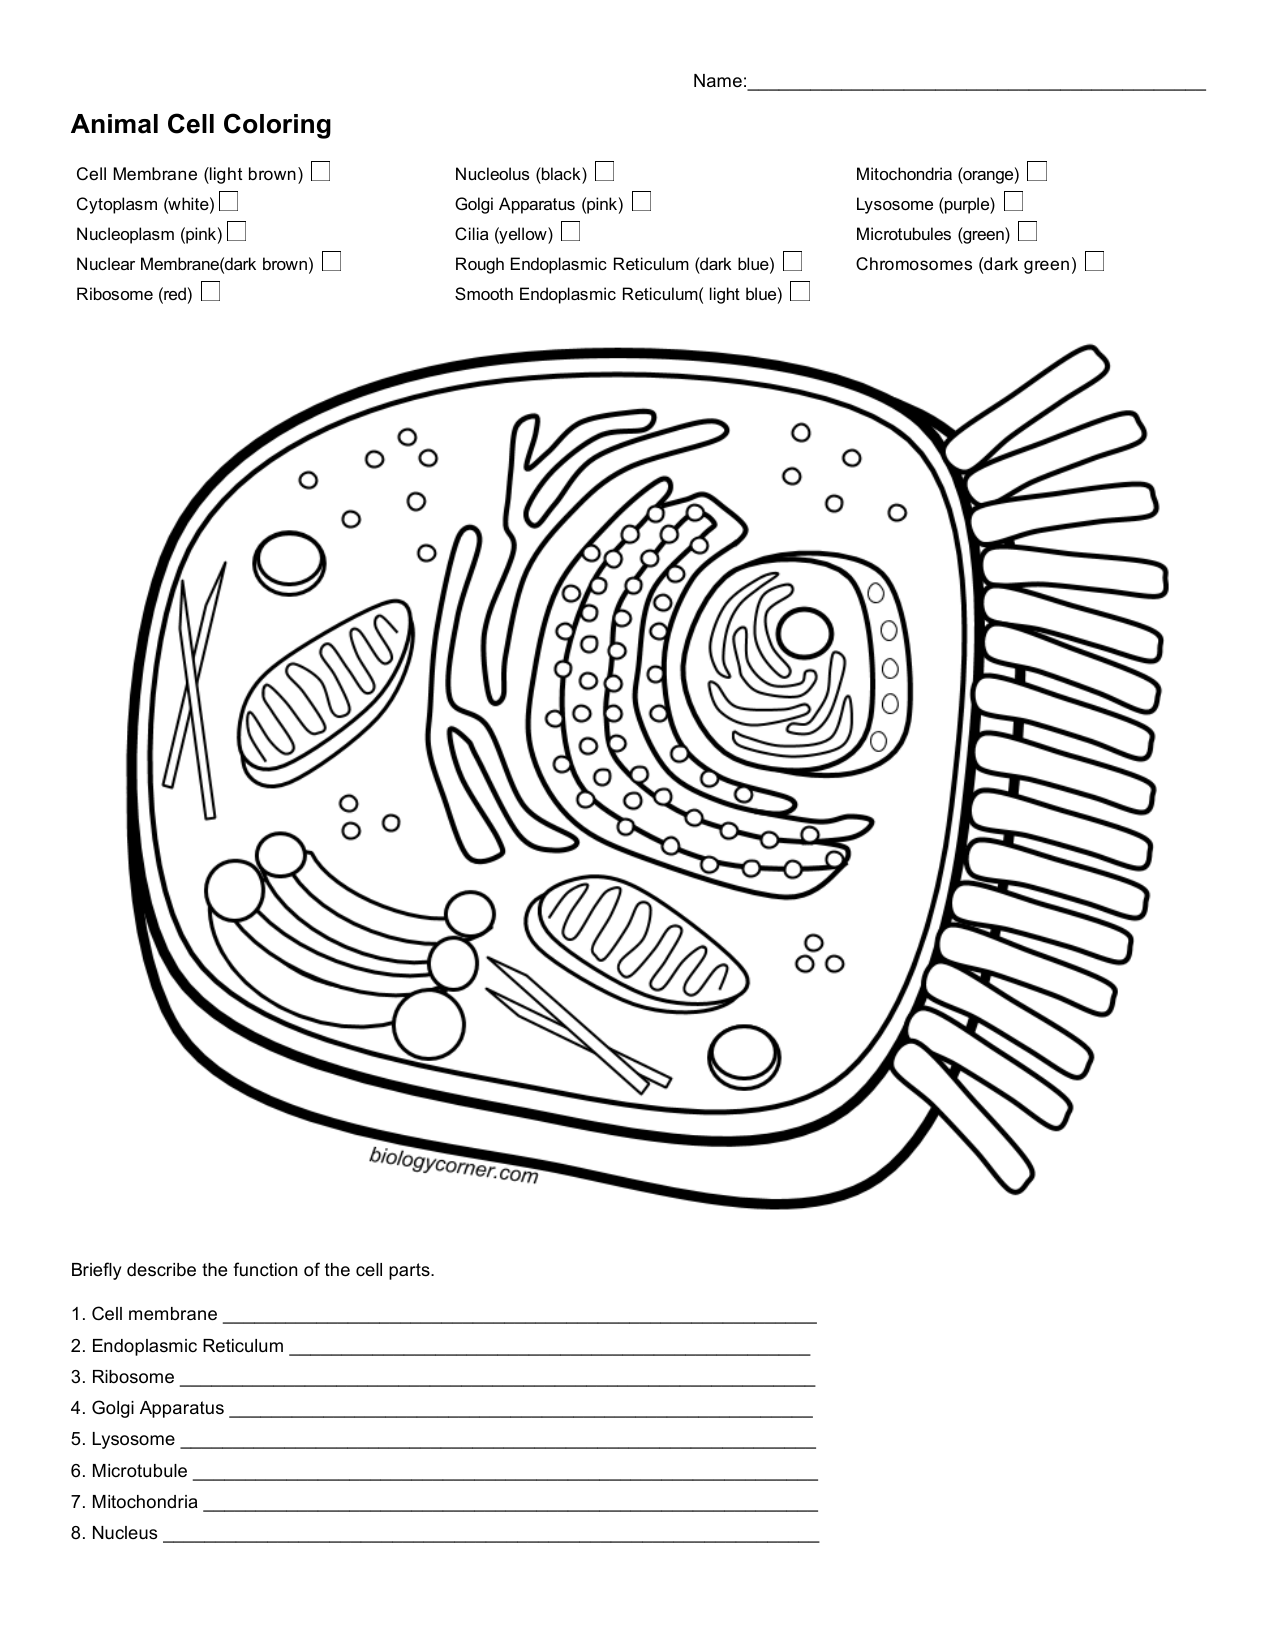 Animal Cell Coloring In Animal Cell Coloring Worksheet